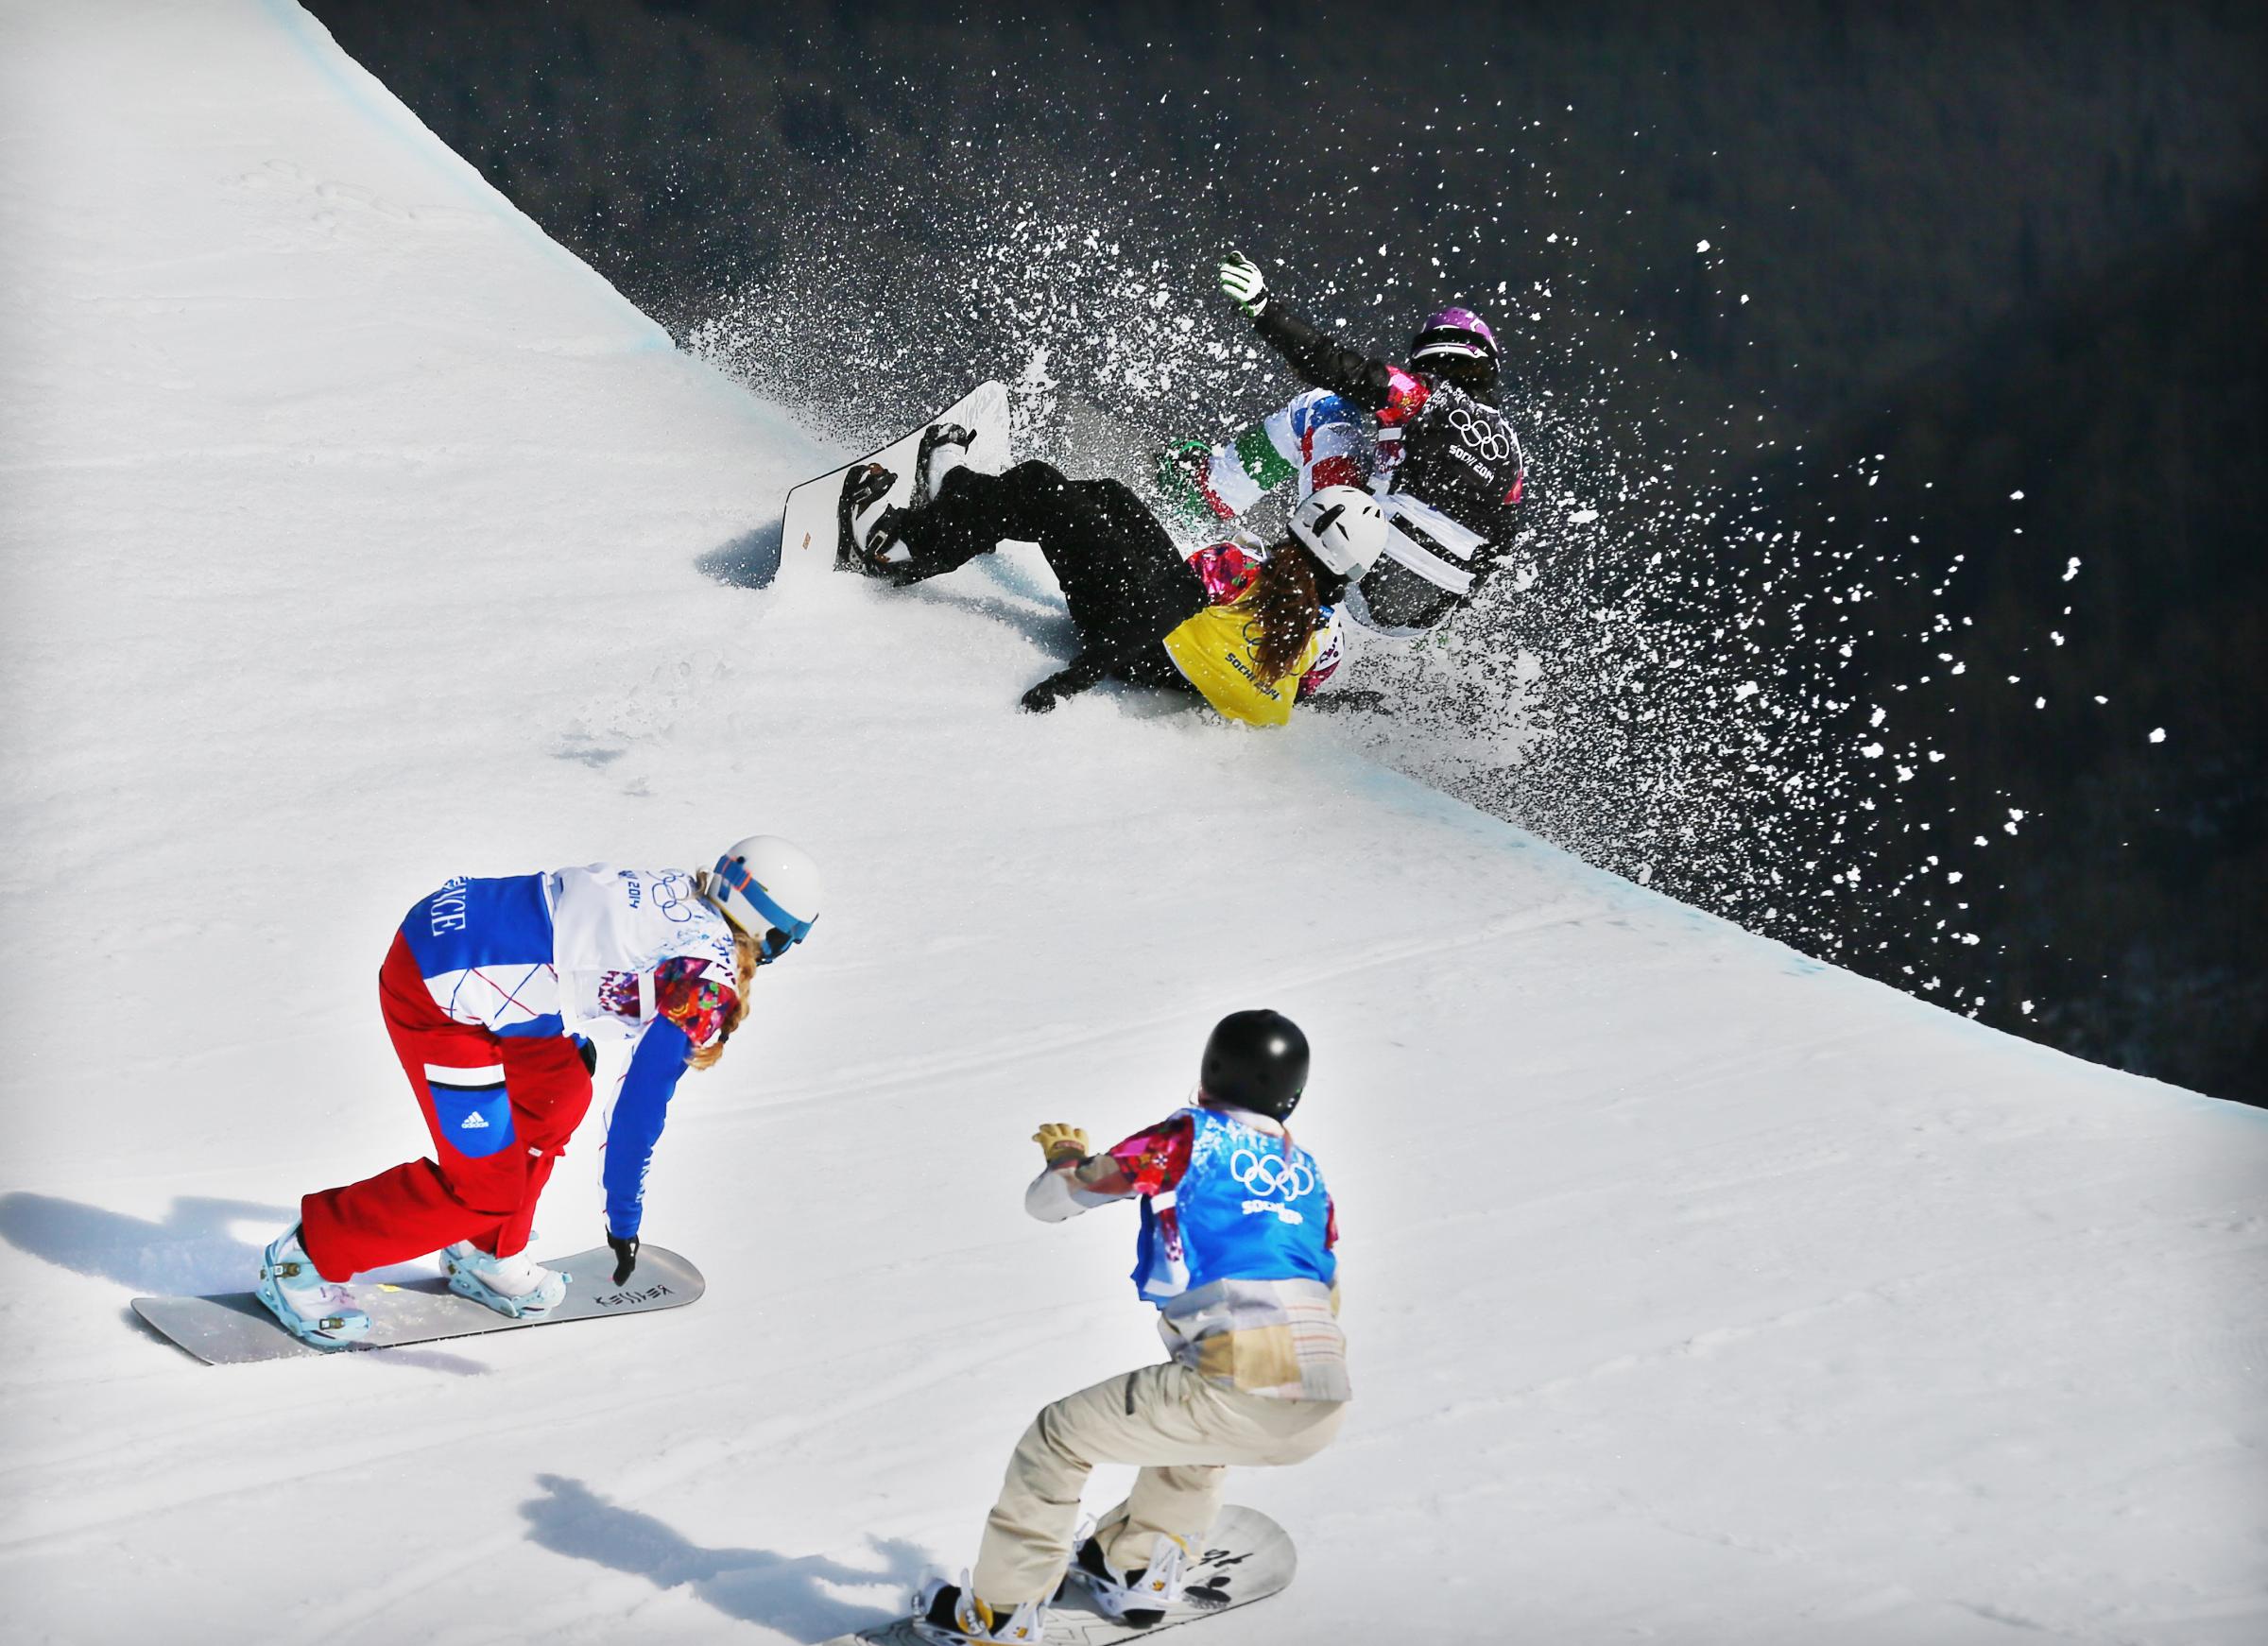 Michela Moioli of Italy (black bib) collides with Alexandra Jekova of Bulgaria (yellow) in front of Chloe Trespeuch of France (white) and Faye Gulini of the USA (blue) during the Women's Snowboard Cross final at Rosa Khutor Extreme Park at the Sochi 2014 Olympic Games, Krasnaya Polyana, Russia, Feb. 16, 2014.